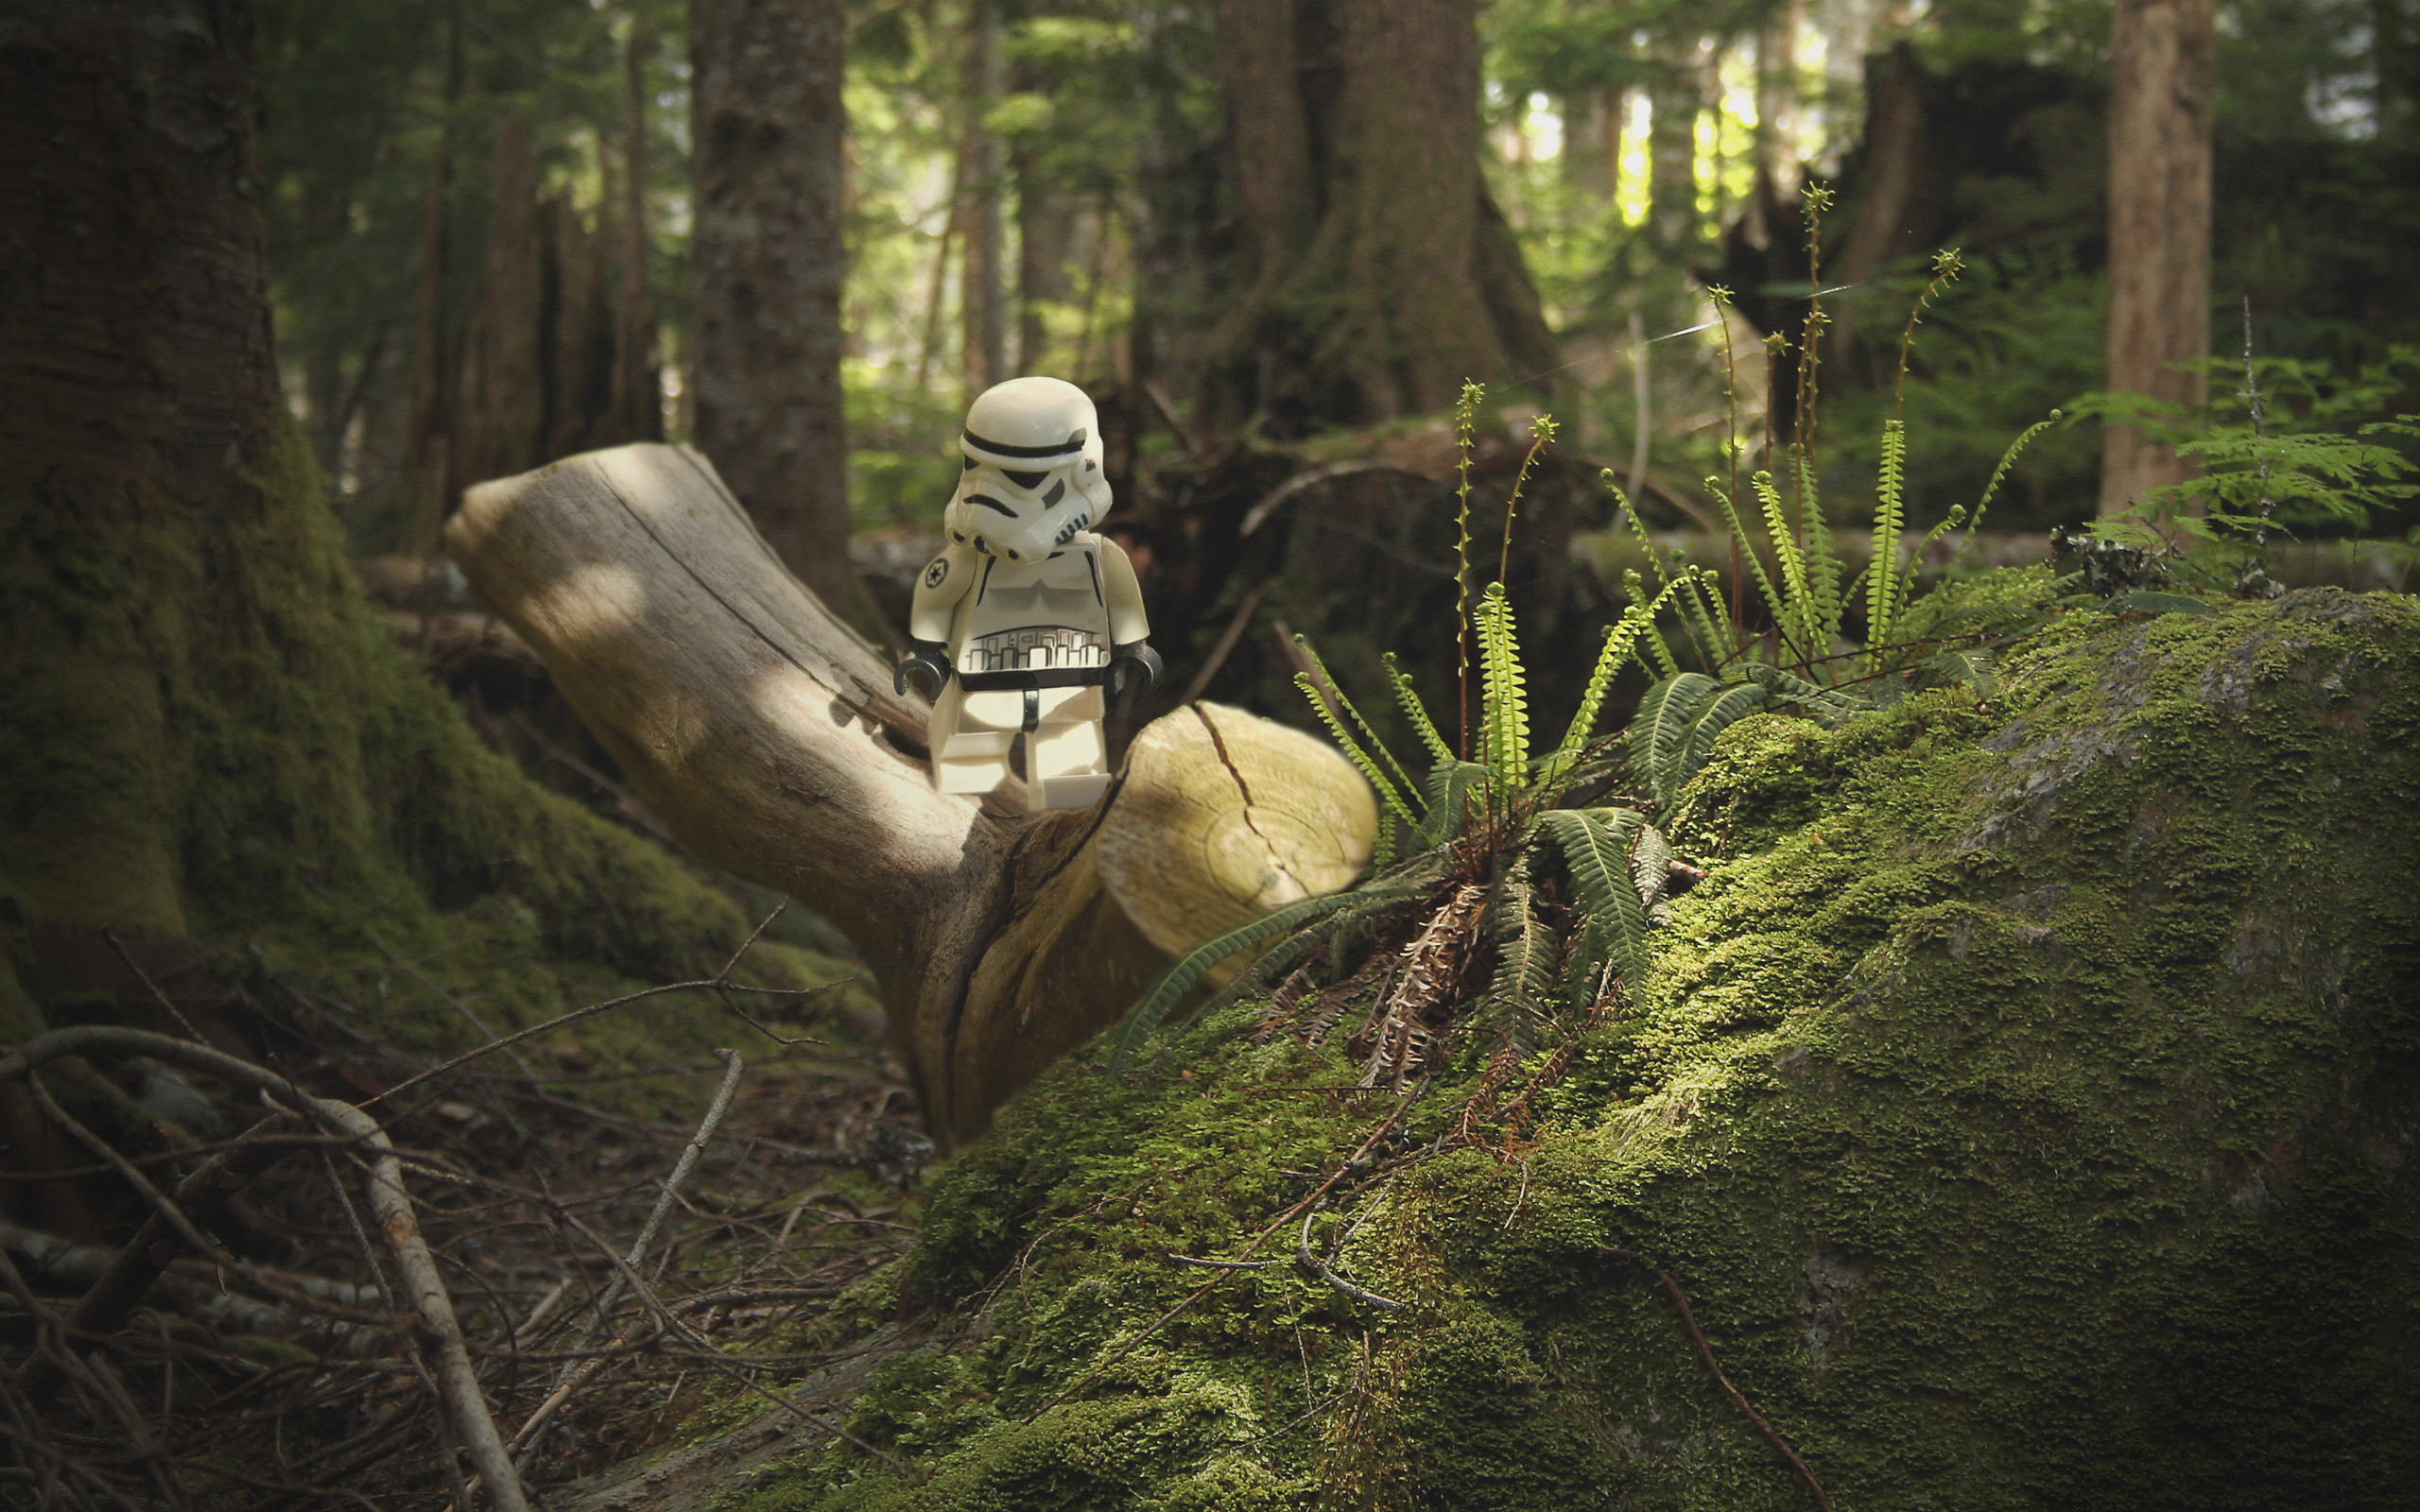 2560x1600 lego-stormtrooper-1080p-high-quality-lego-stormtrooper-category-